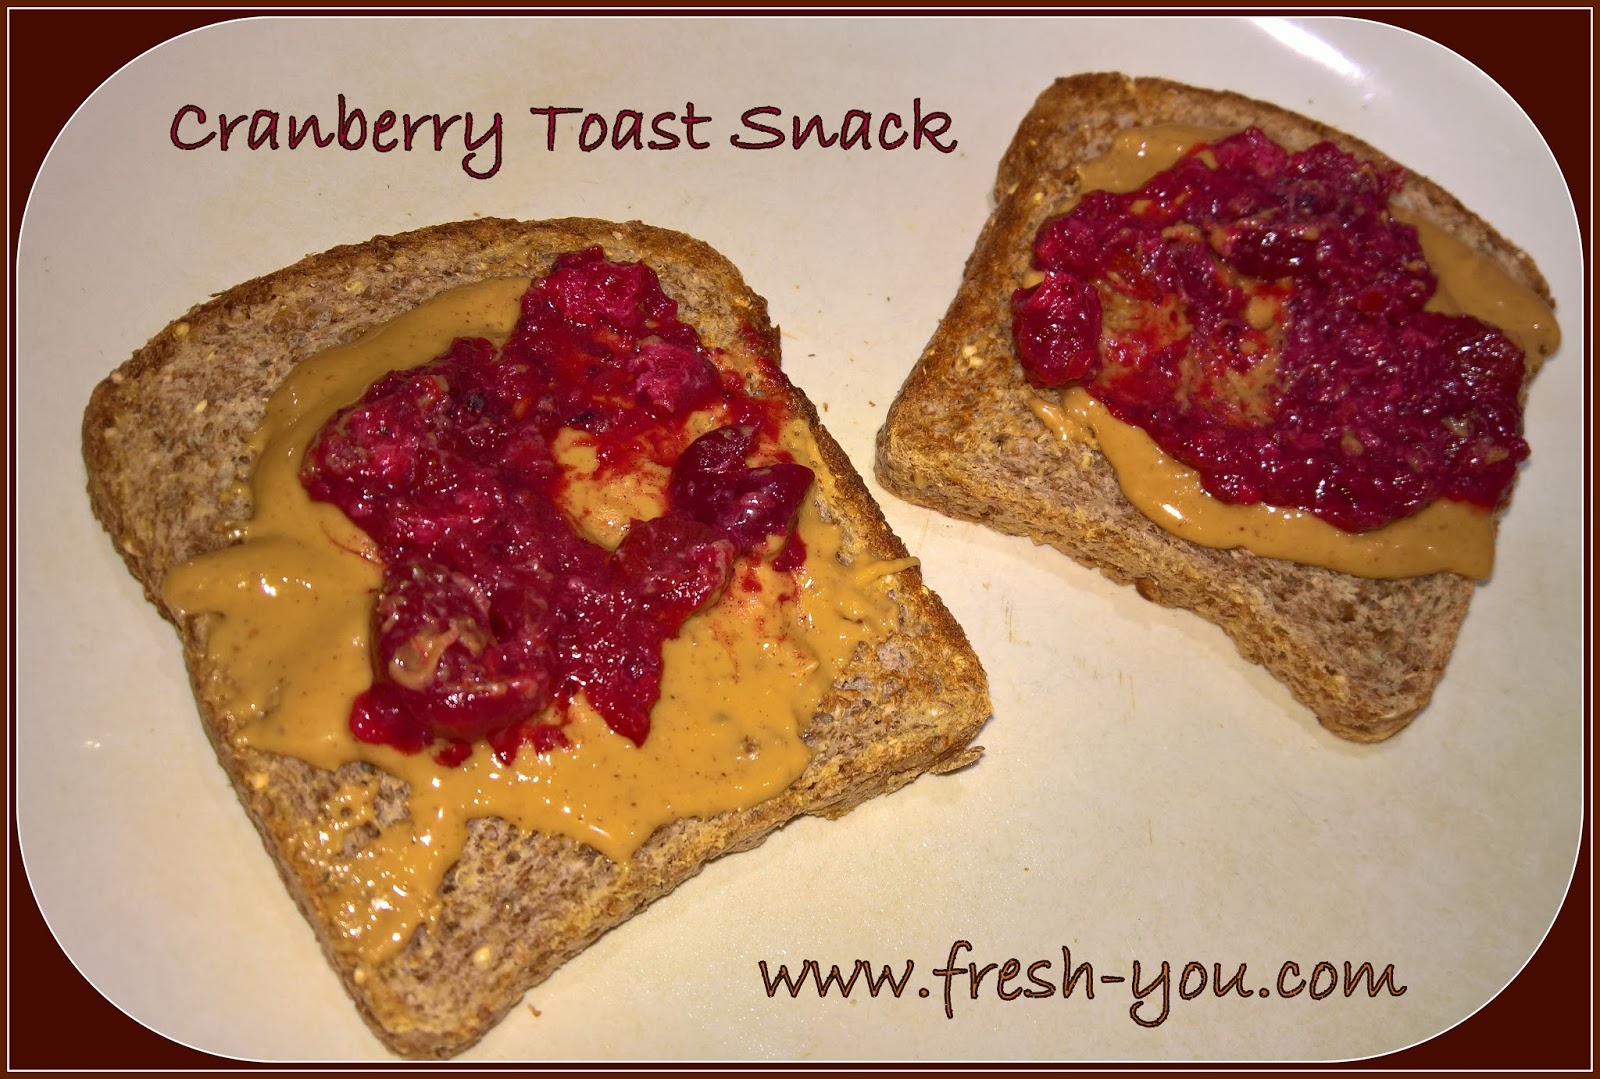 Fresh-You Nutrition, Fitness, and Wellness: Cranberry Toast Snack and ...